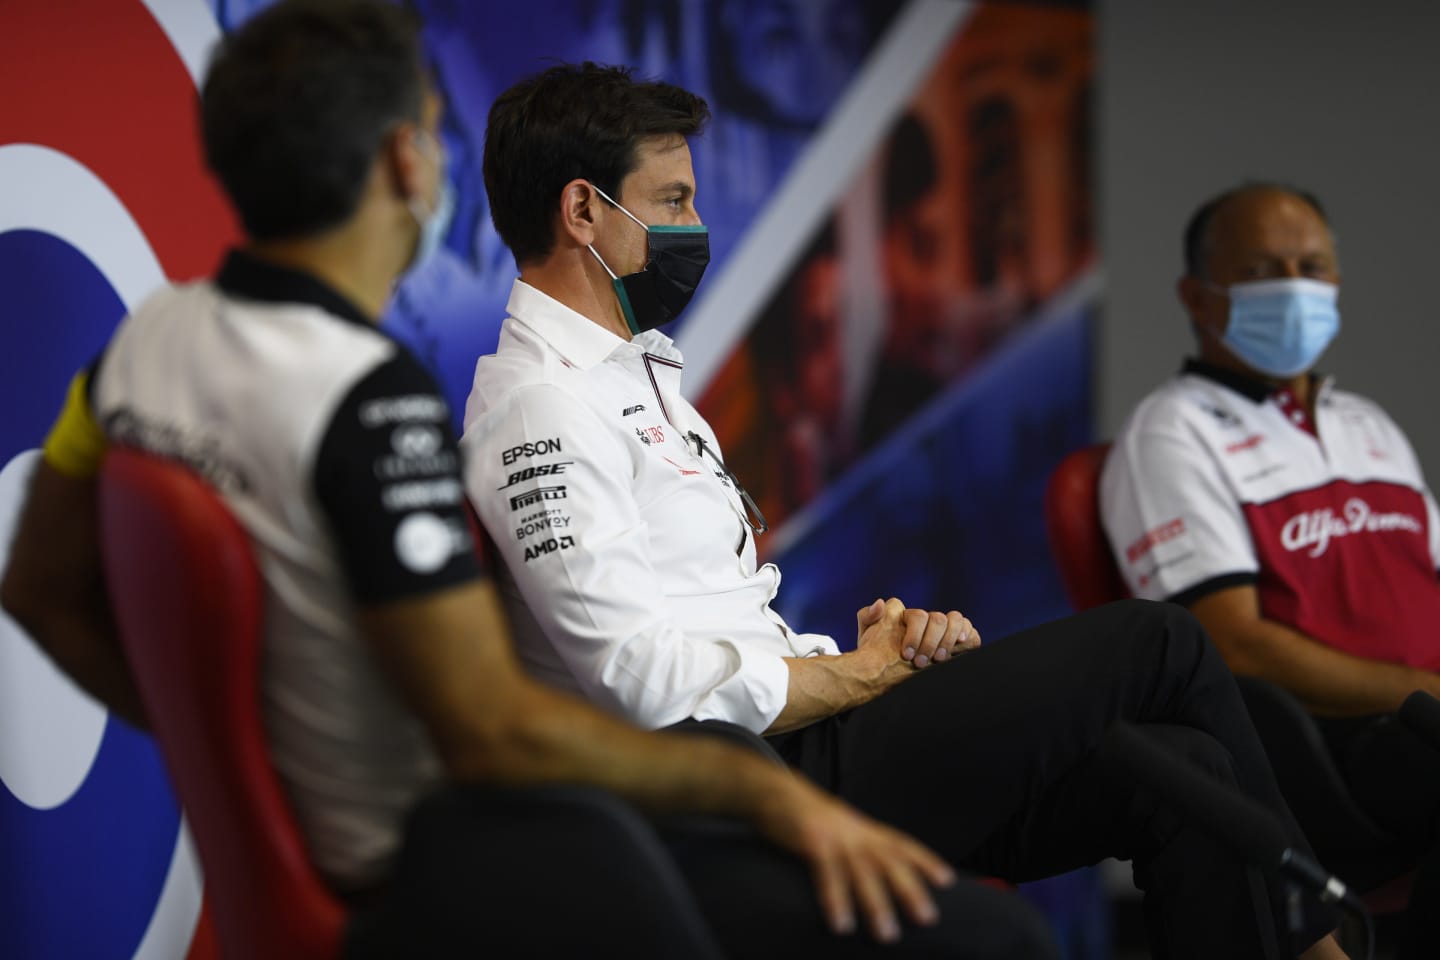 NORTHAMPTON, ENGLAND - AUGUST 07: Mercedes GP Executive Director Toto Wolff talks in the Team Principals Press Conference during practice for the F1 70th Anniversary Grand Prix at Silverstone on August 07, 2020 in Northampton, England. (Photo by Rudy Carezzevoli/Getty Images)